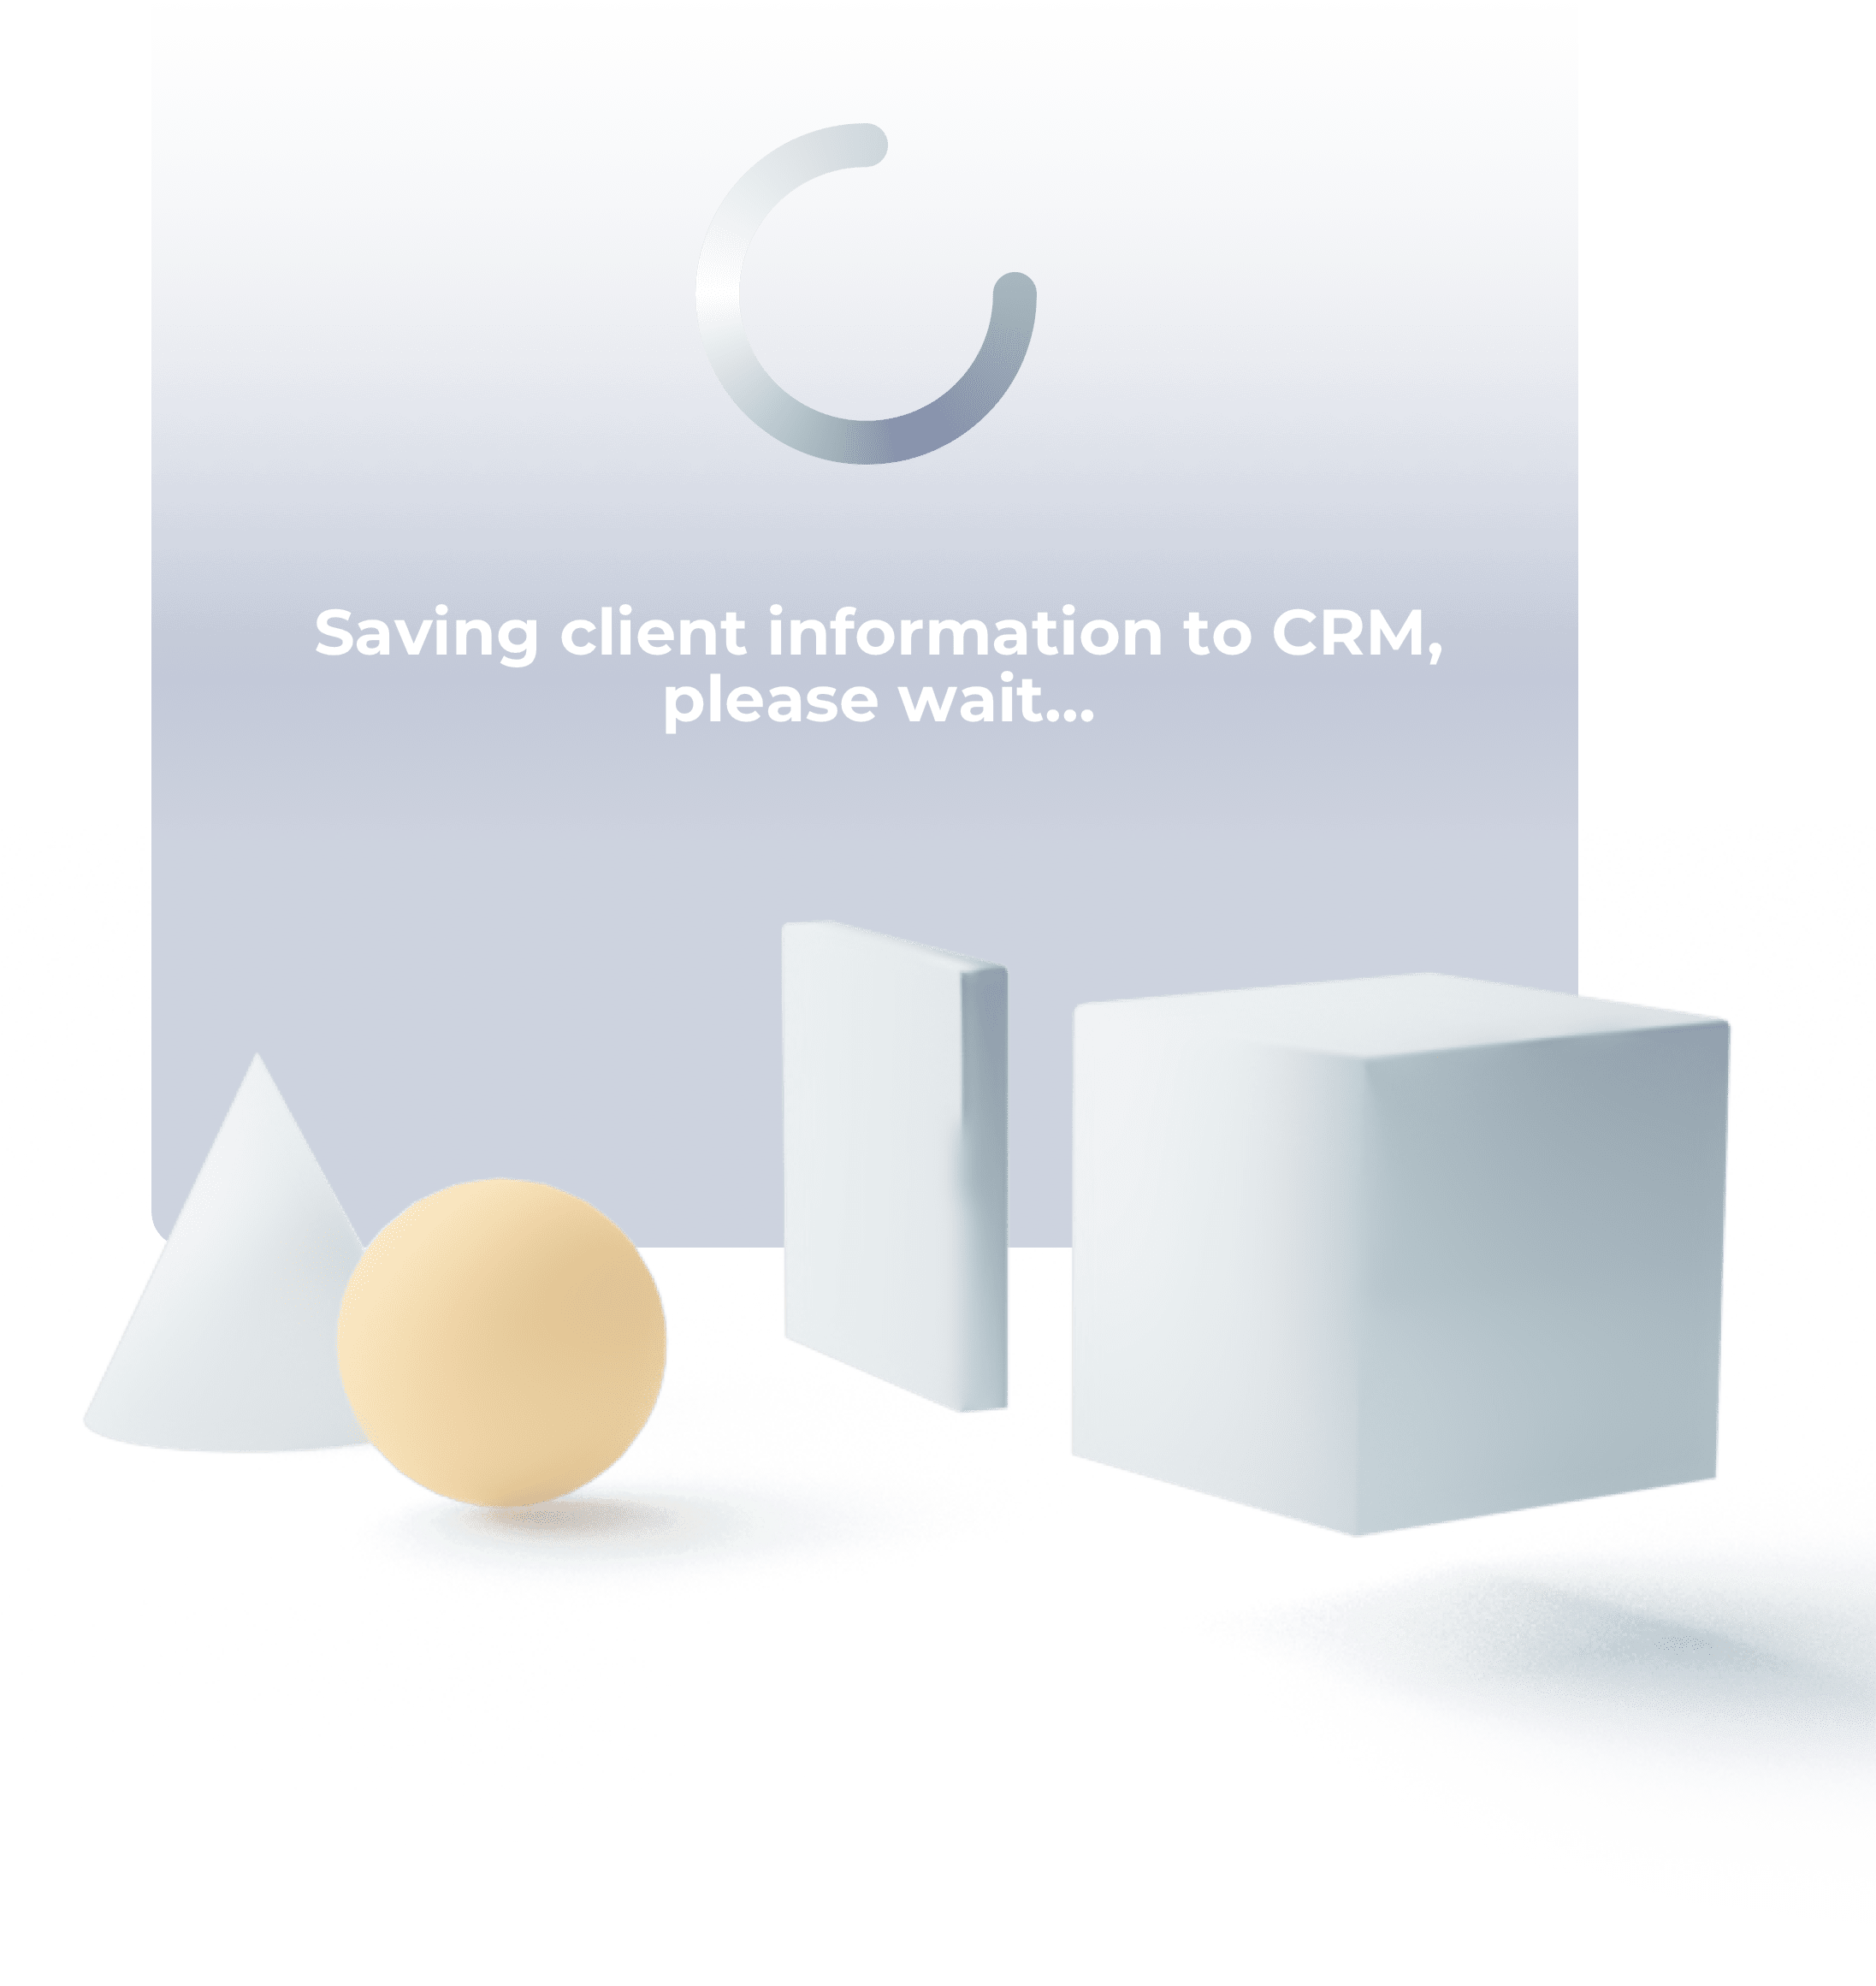 simplified-crm-image